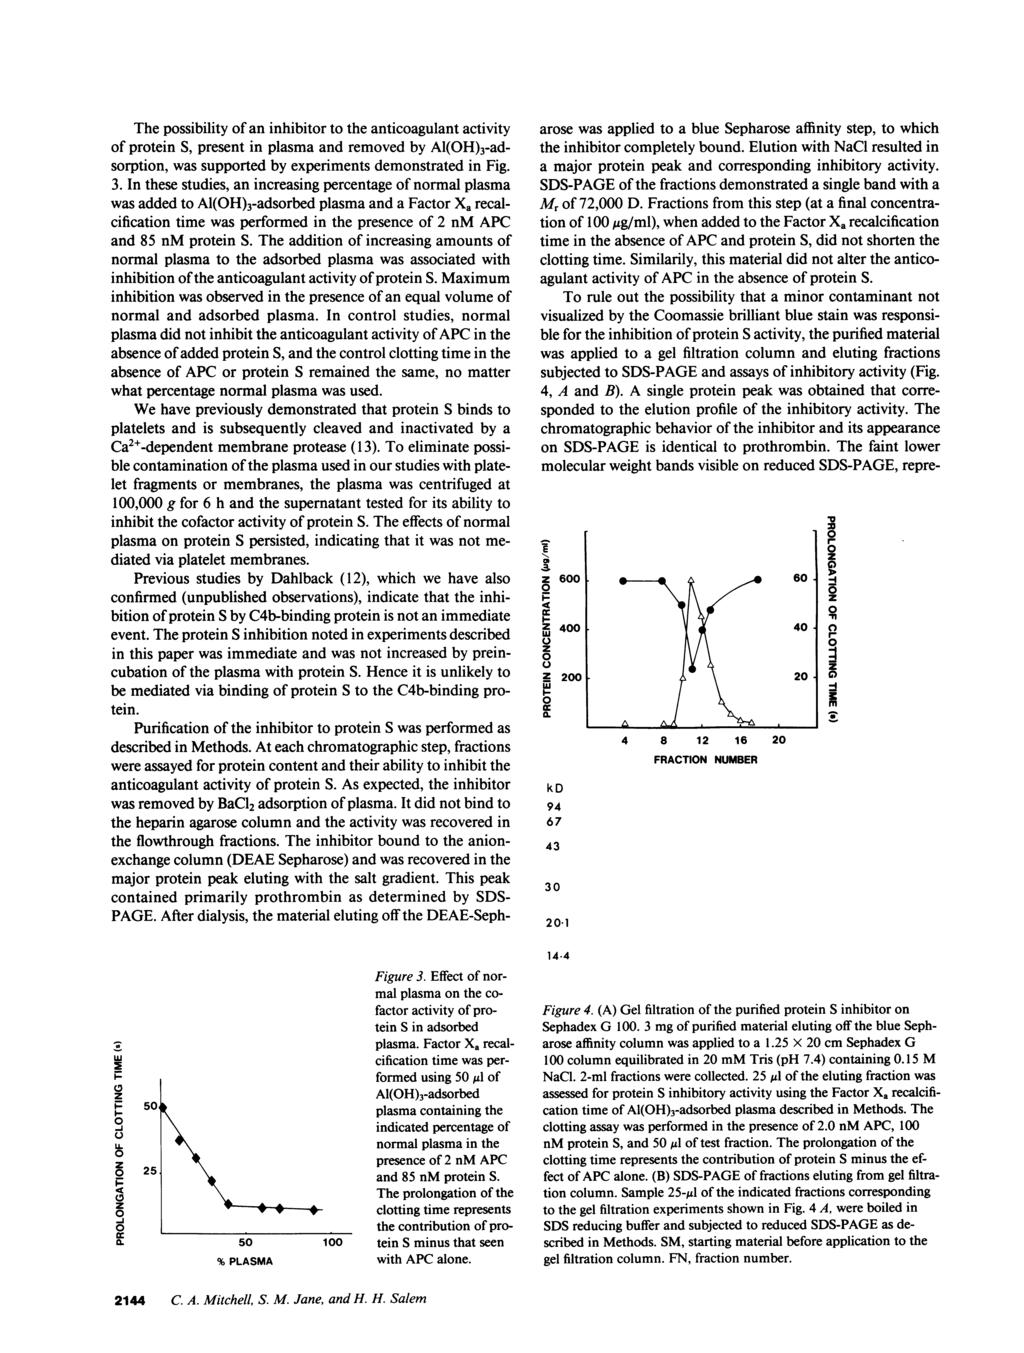 The possibility of an inhibitor to the anticoagulant activity of protein S, present in plasma and removed by Al(OH)3-adsorption, was supported by experiments demonstrated in Fig. 3.